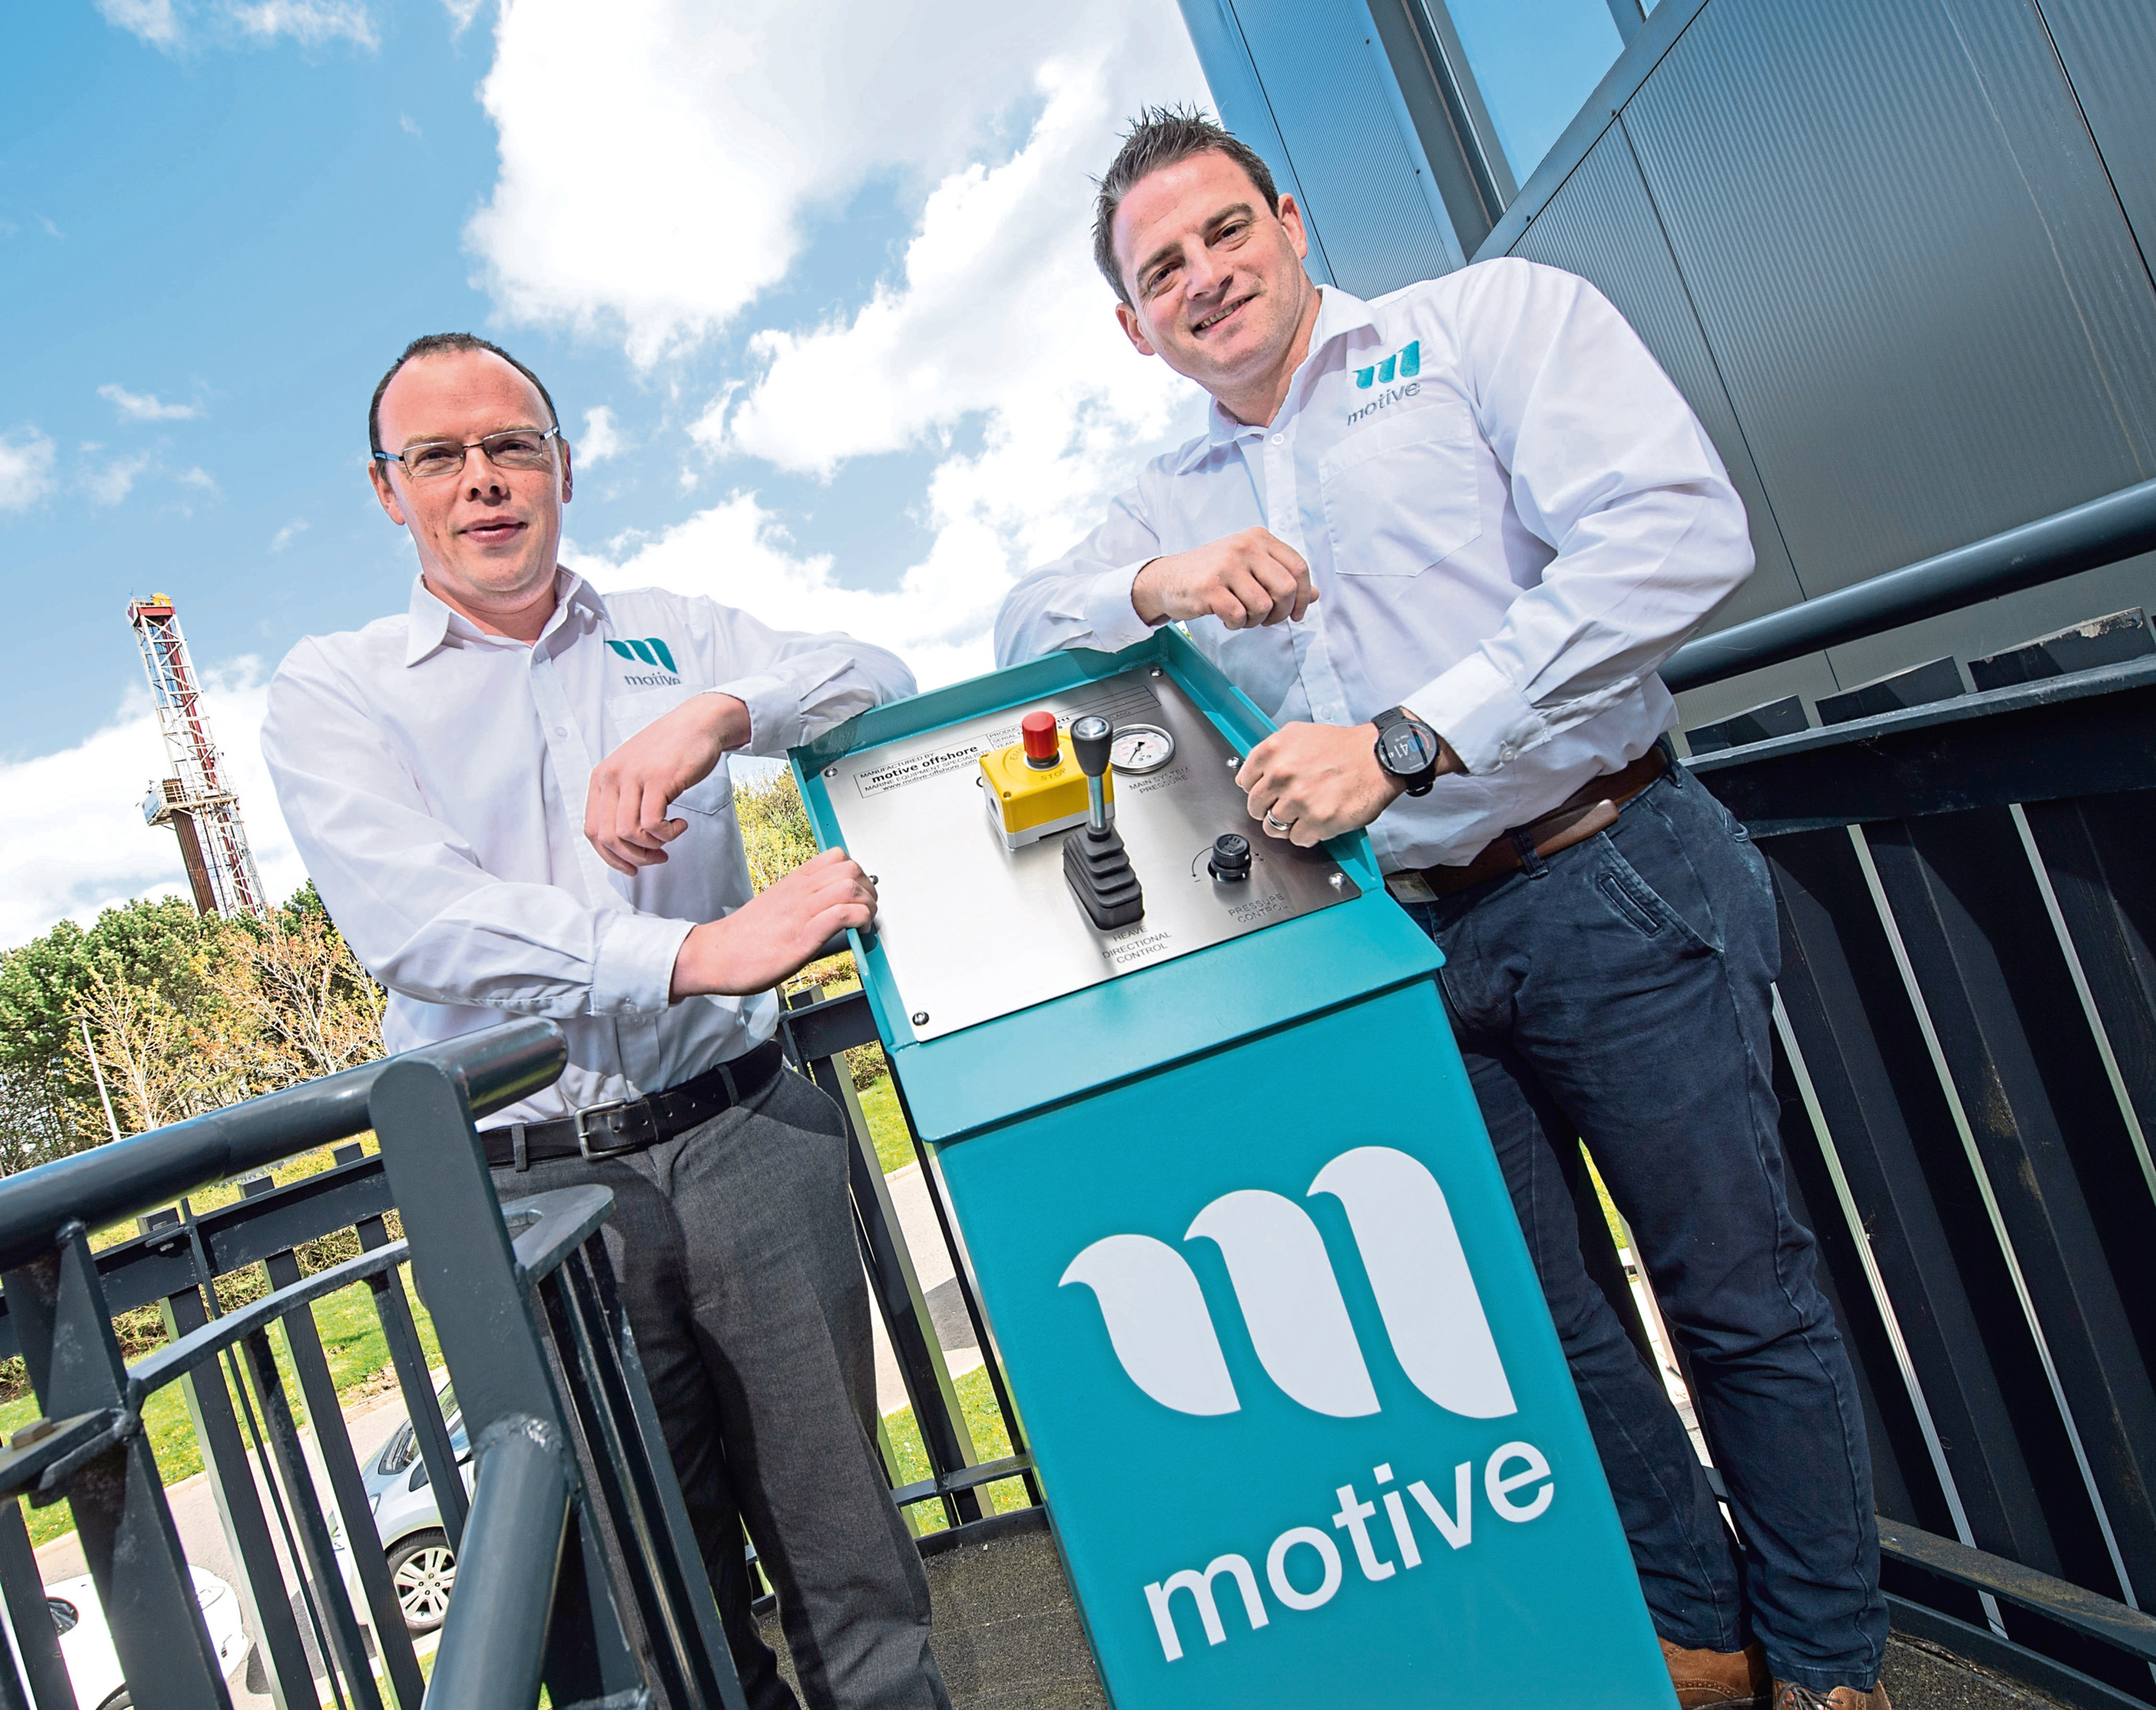 Northeast offshore services firm bounces back from the brink to win